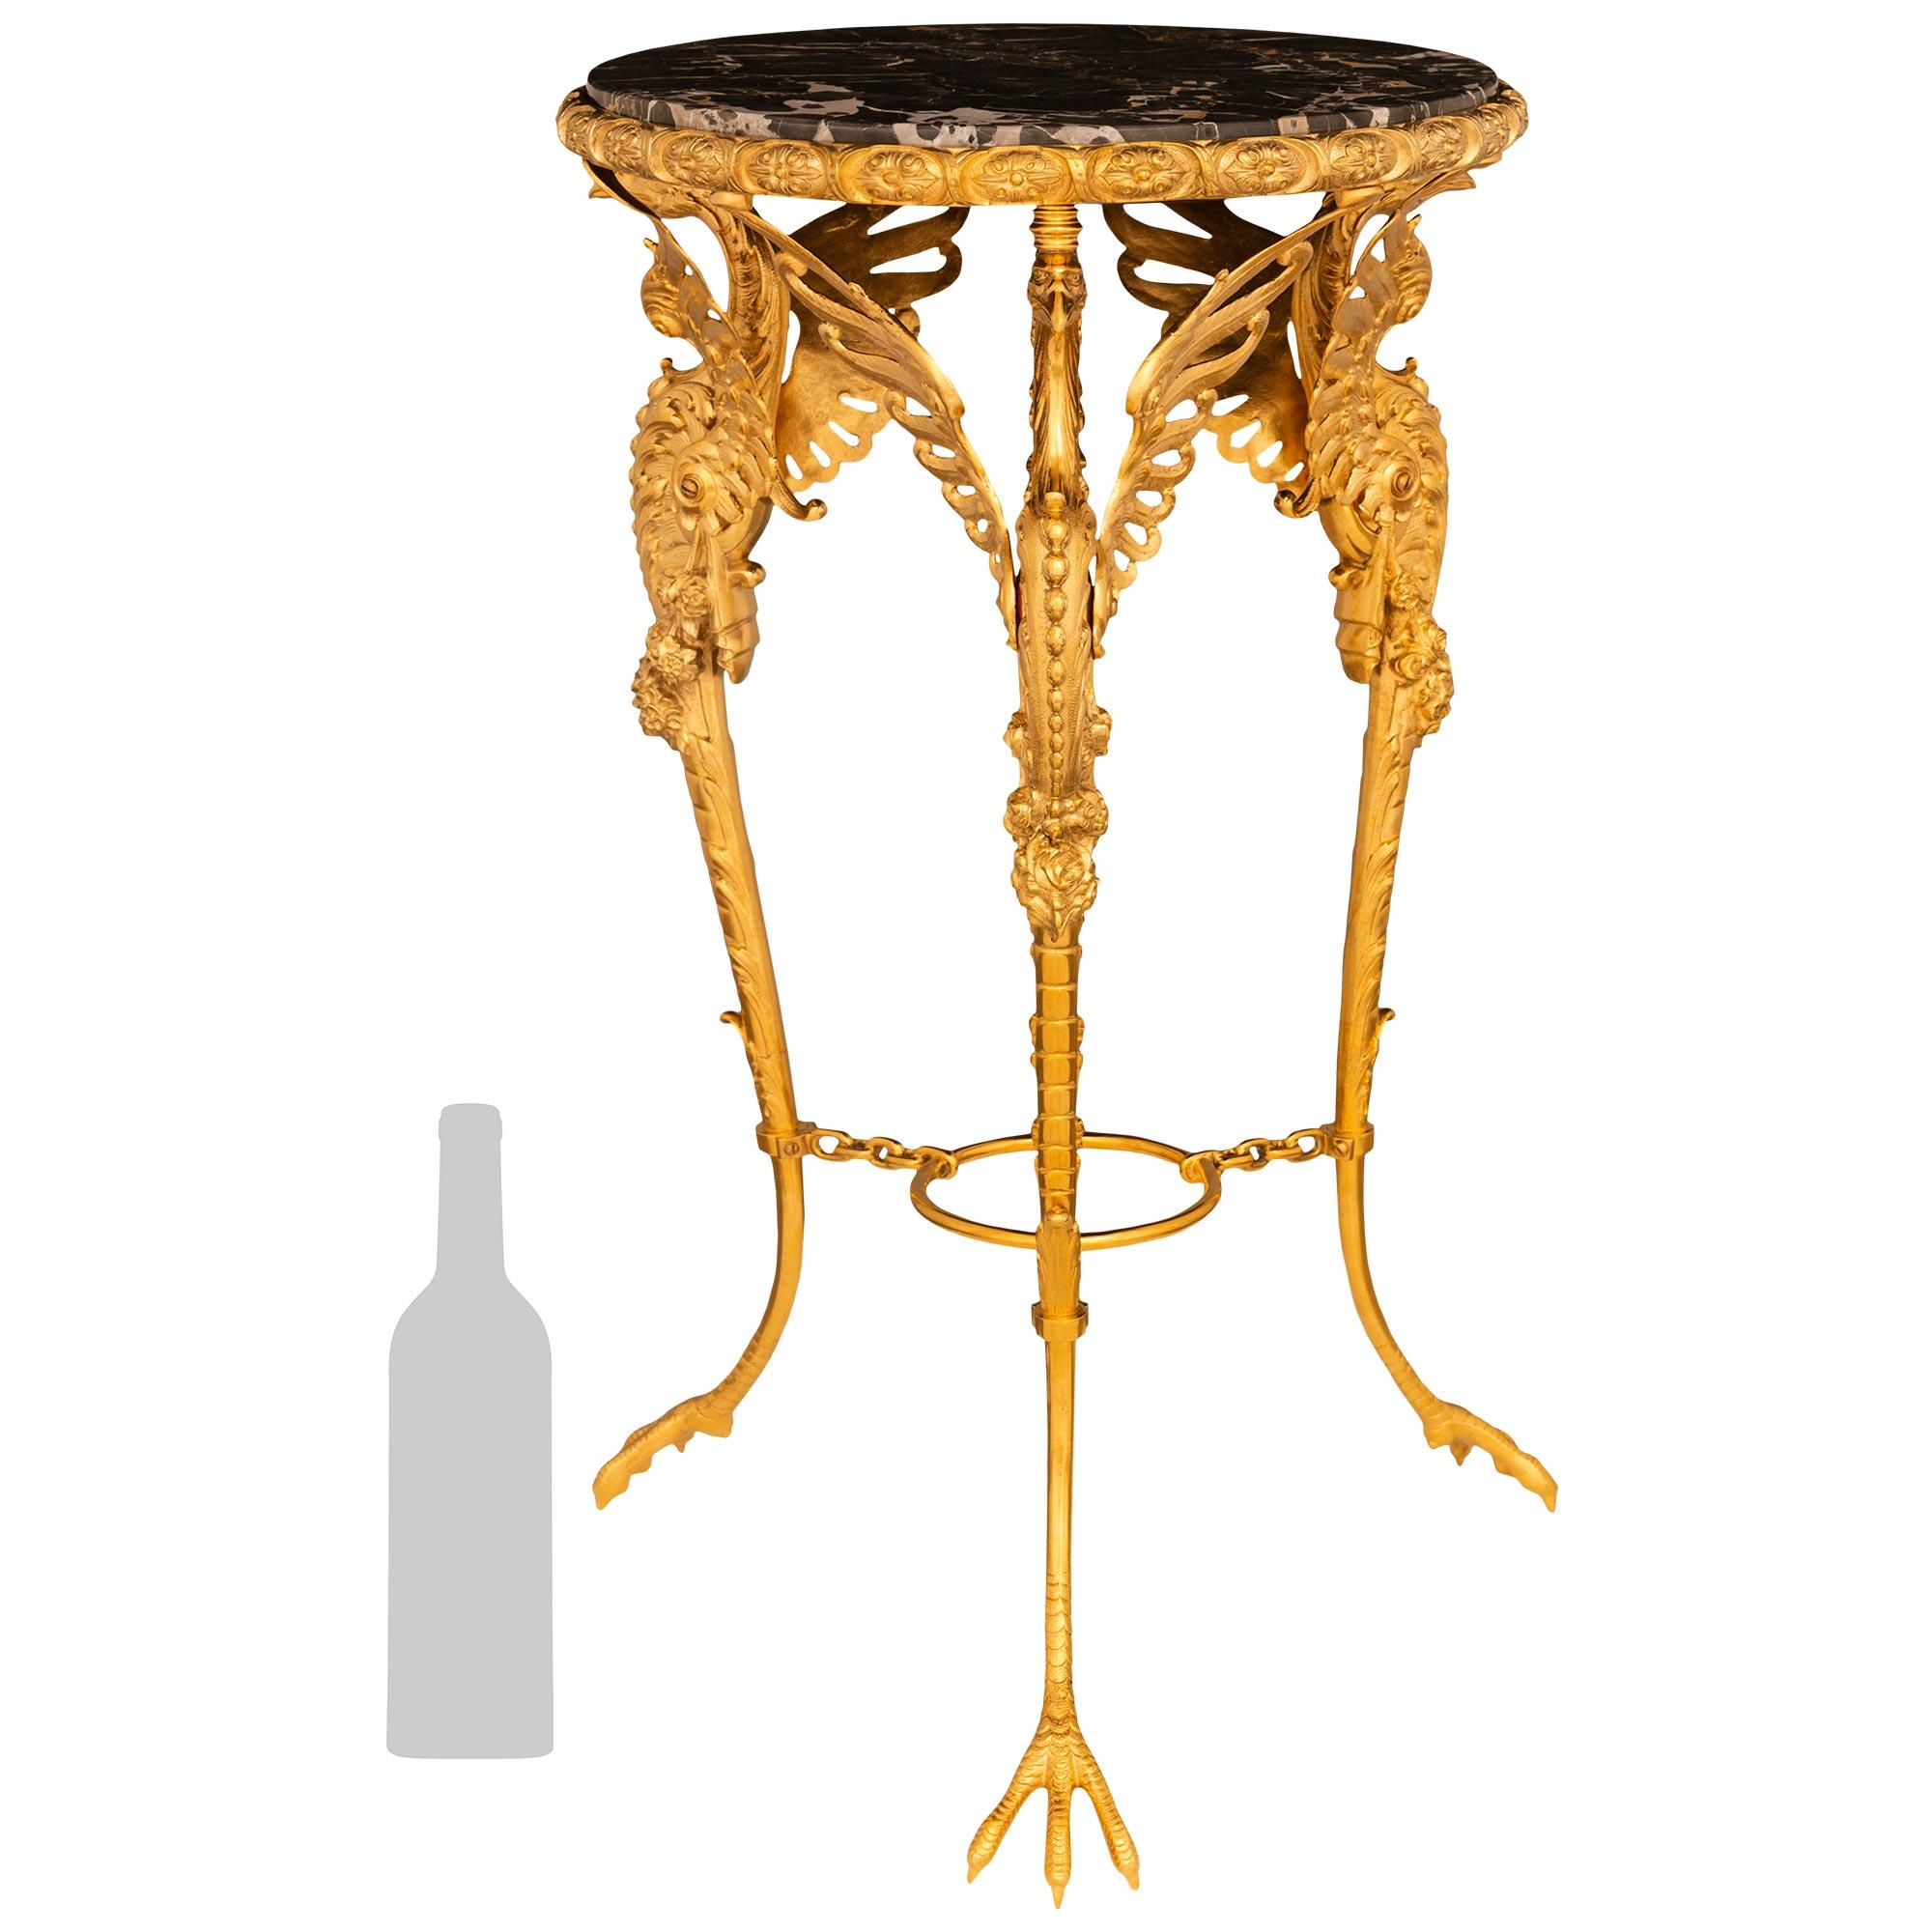 An impressive and high quality French 19th century Neo-Classical st. Ormolu and Portoro Marble side table, circa 1890. The table is raised by three slender and tapering legs supported on claw feet. Each leg is connected by a circular Ormolu ring